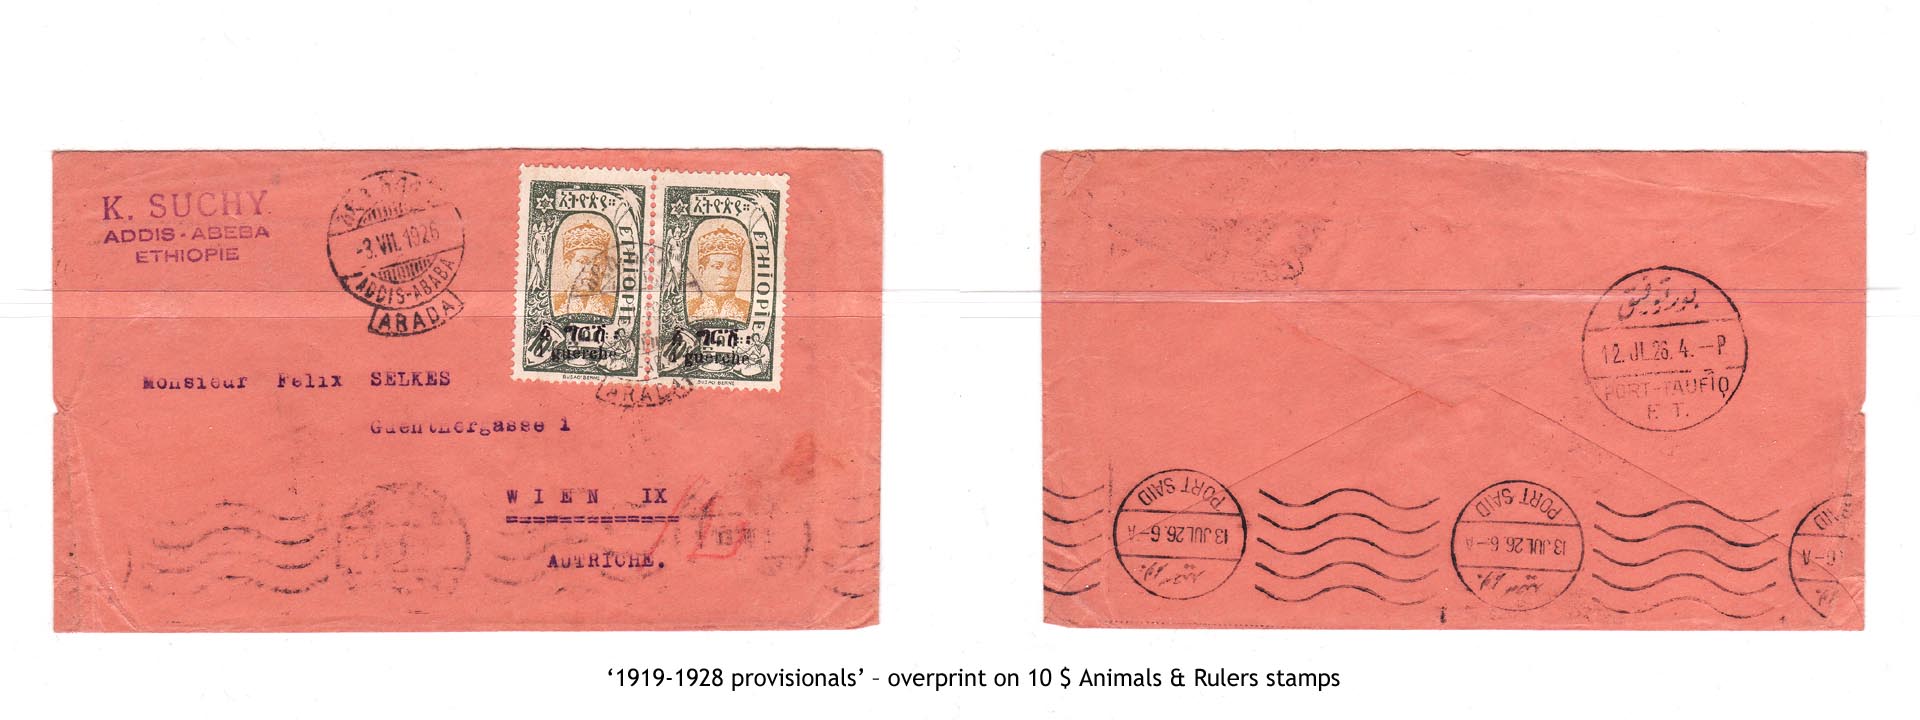 1919-1928 provisionals’ – overprint on 10$ Animals & Rulers stamps